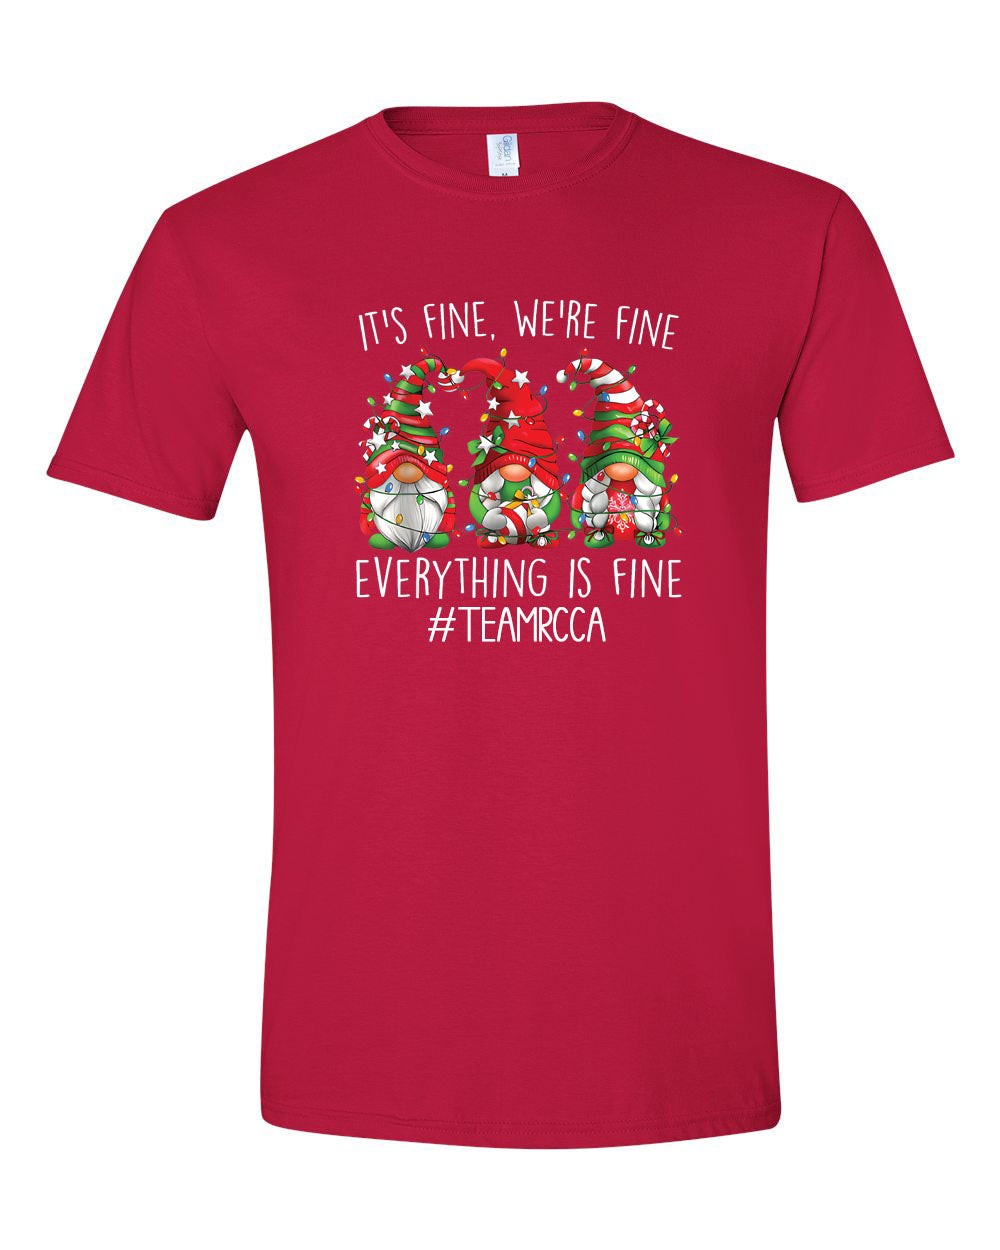 Gnomes Everything is fine T-Shirt